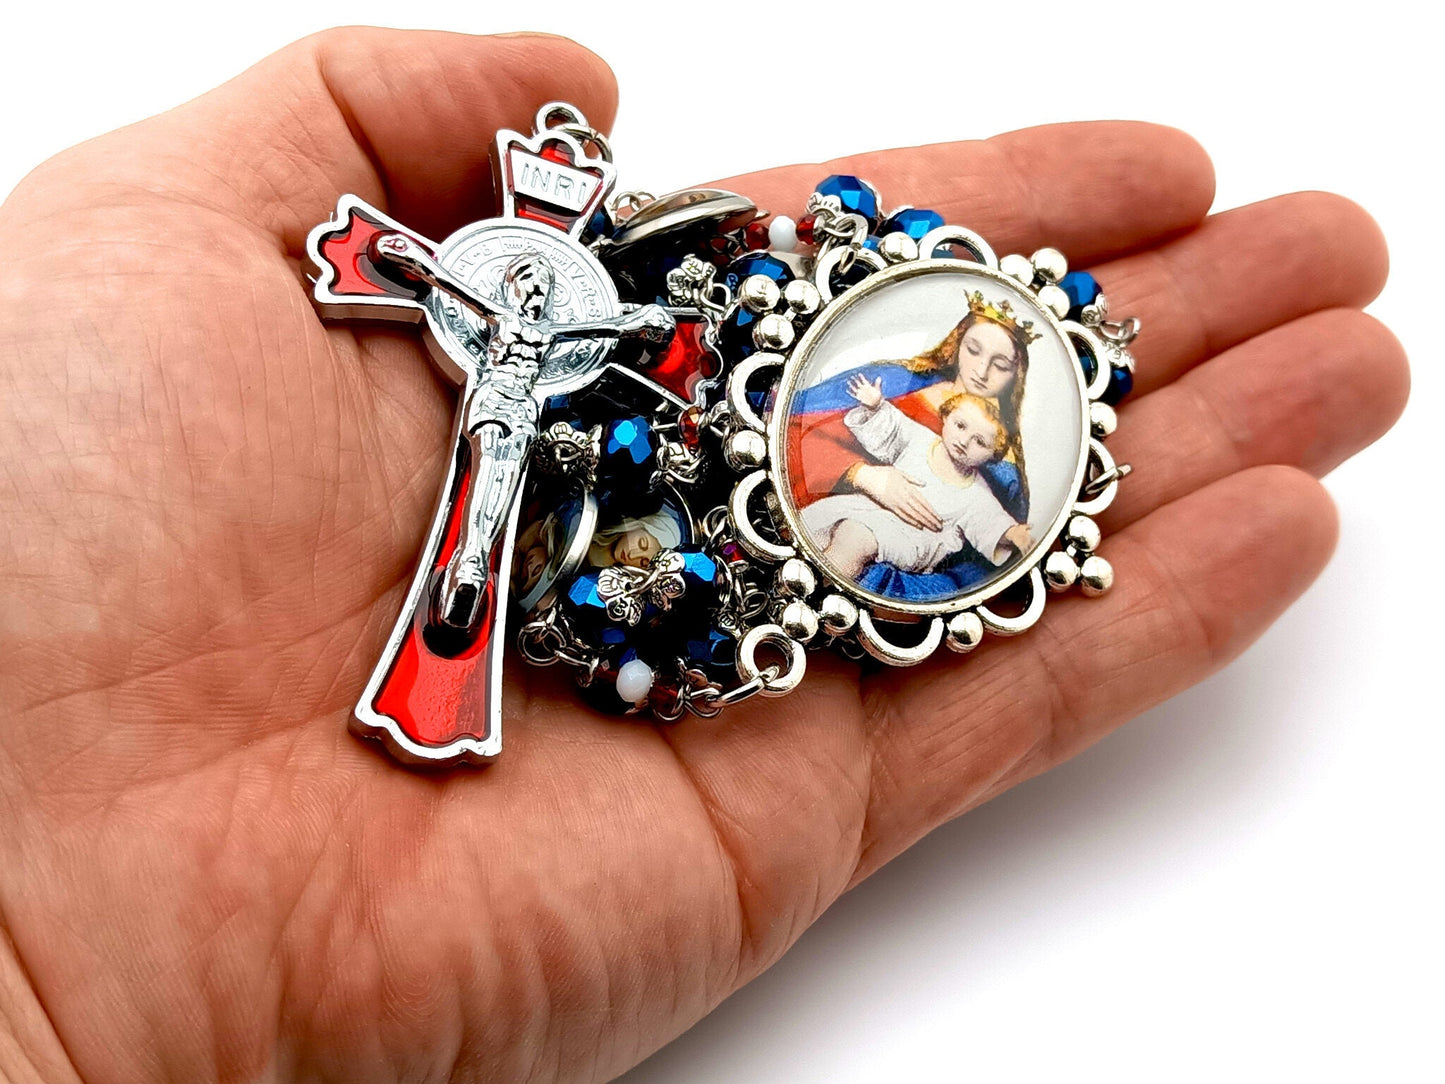 Virgin and Child unique rosary beads with blue and red glass beads and red enamel Saint Benedict crucifix.